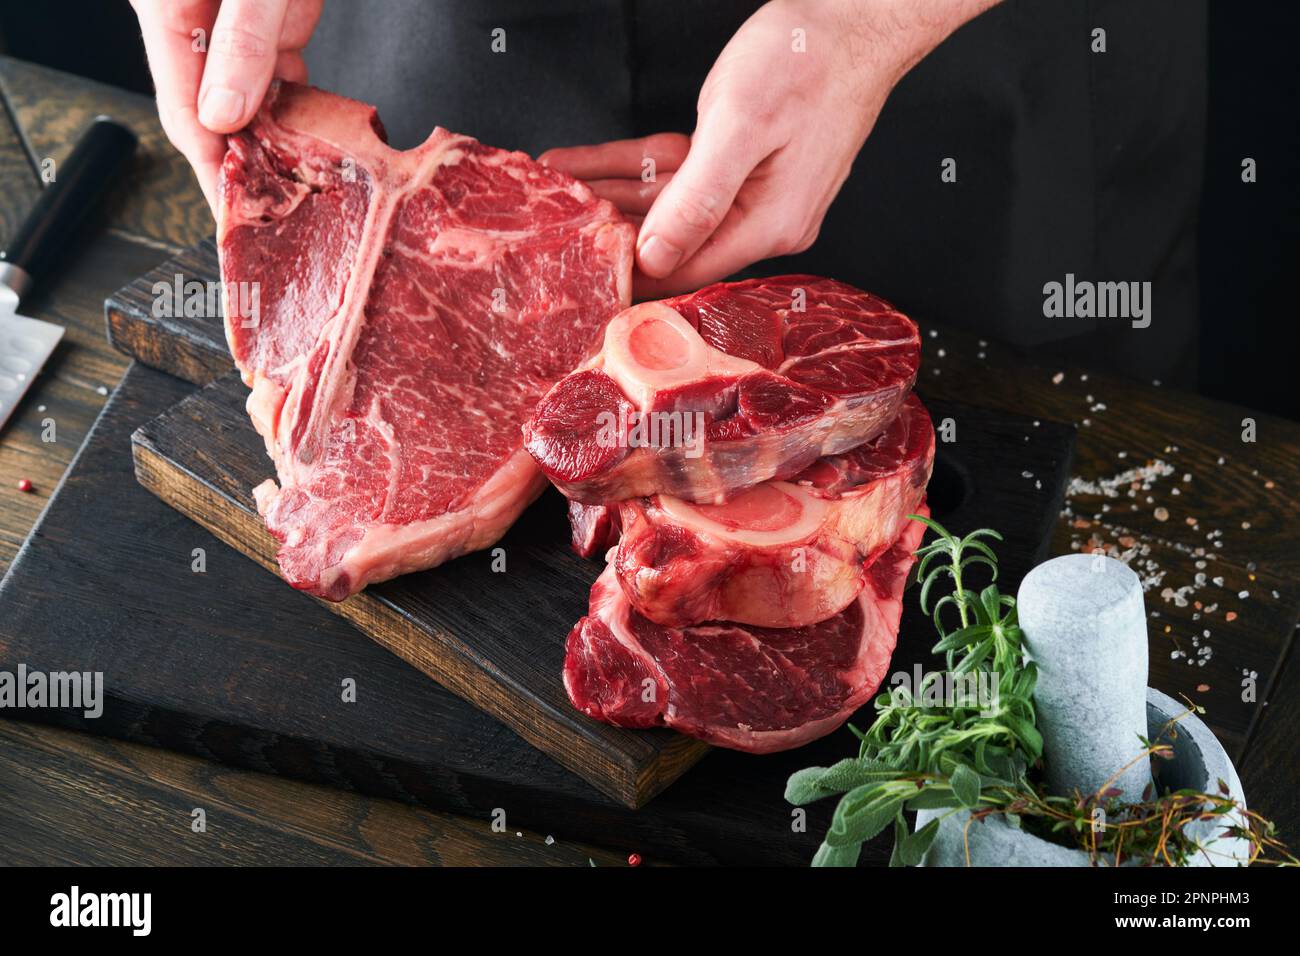 Steak beef meat. Chef cutting steak beef. Mans hands hold raw steak Tomahawk on rustic wooden cutting board on black background. Cooking, recipes and Stock Photo